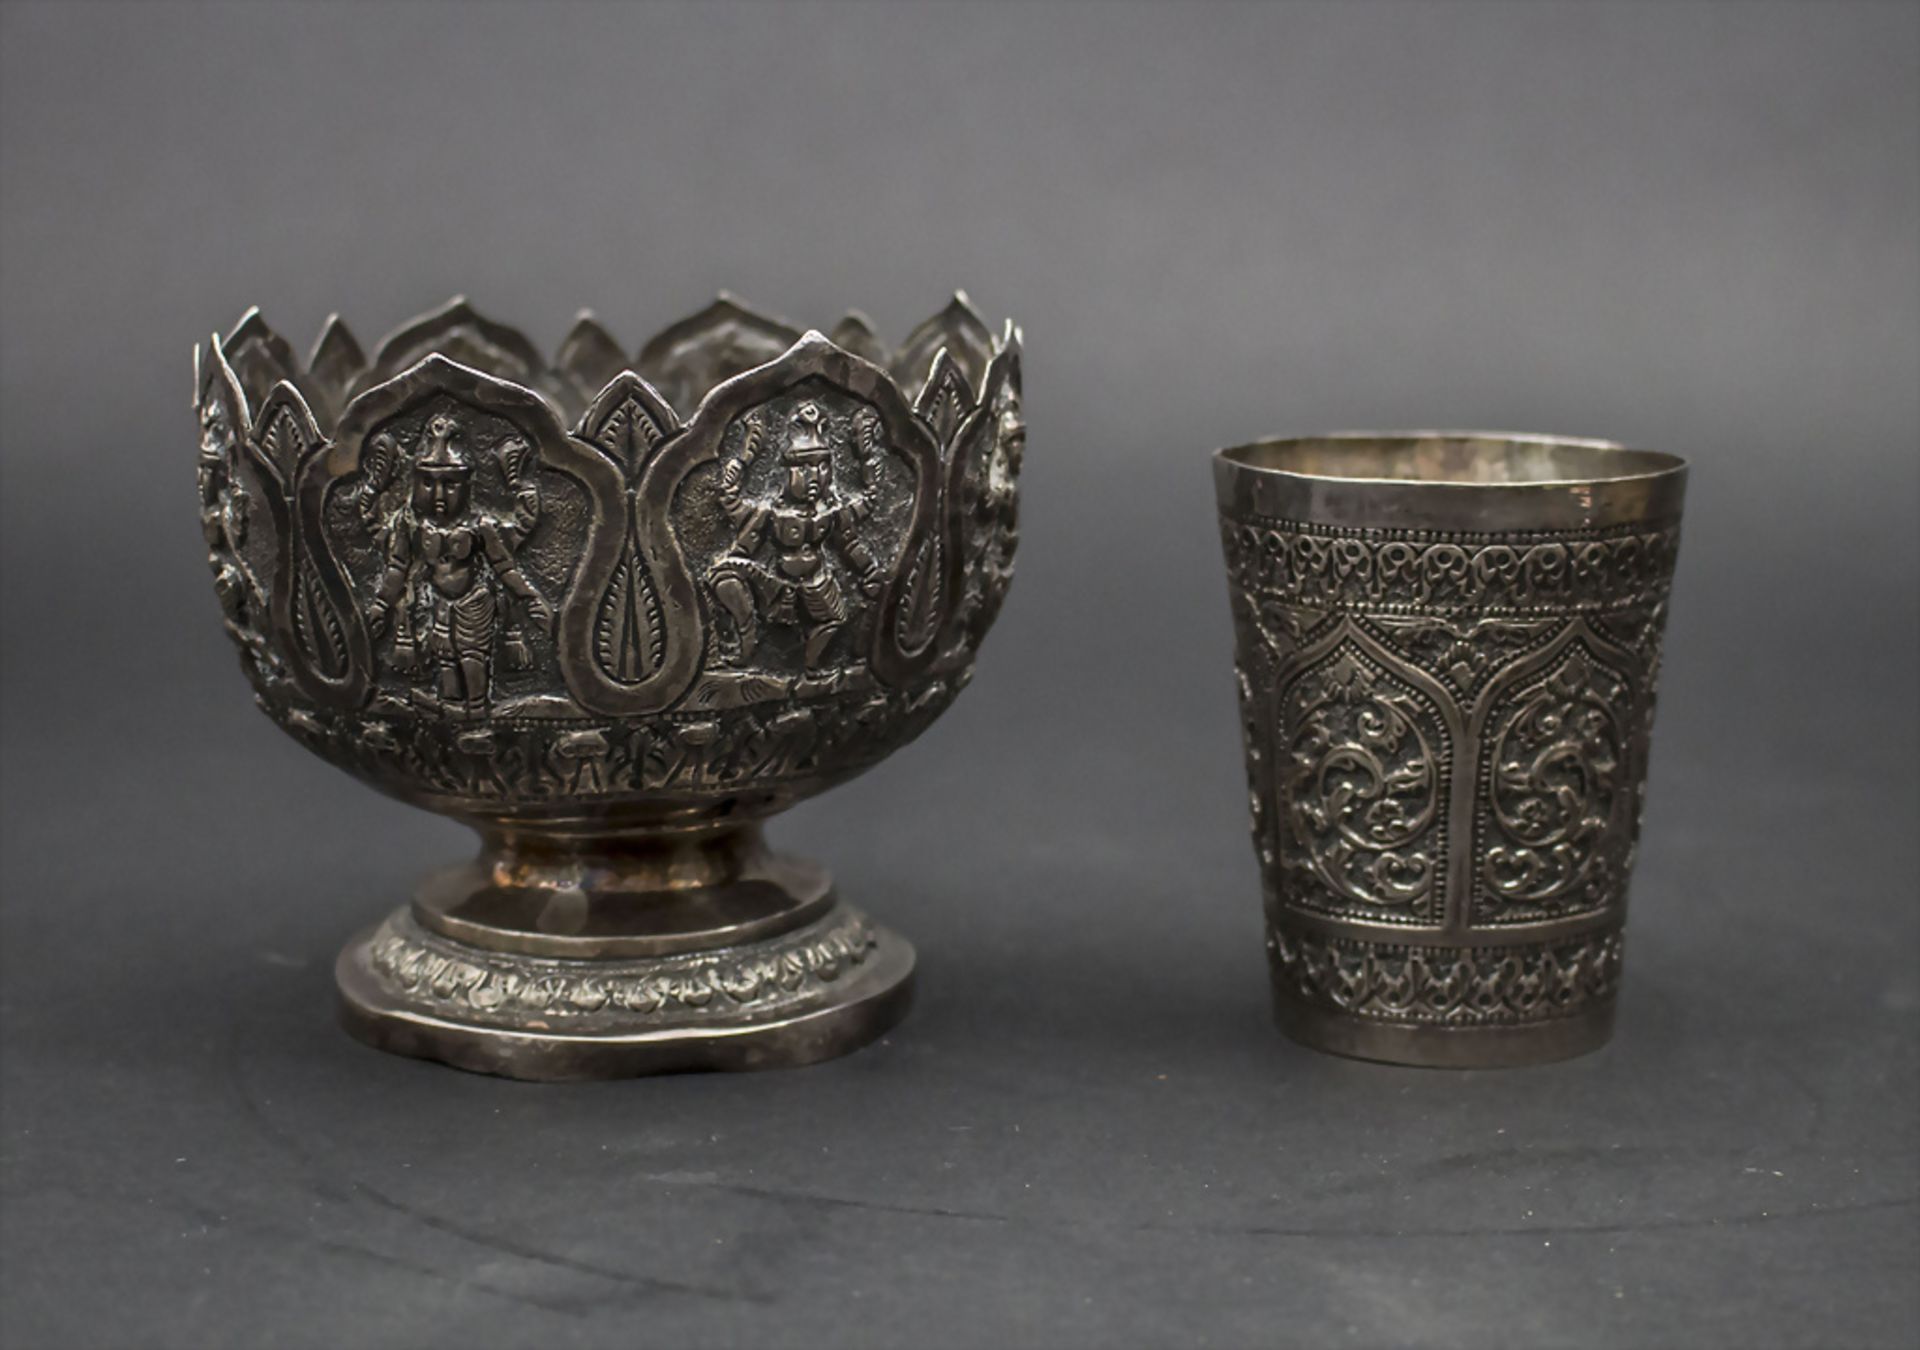 Silber Lotusschale und Becher / A silver lotus bowl and beaker, Thailand - Image 2 of 6